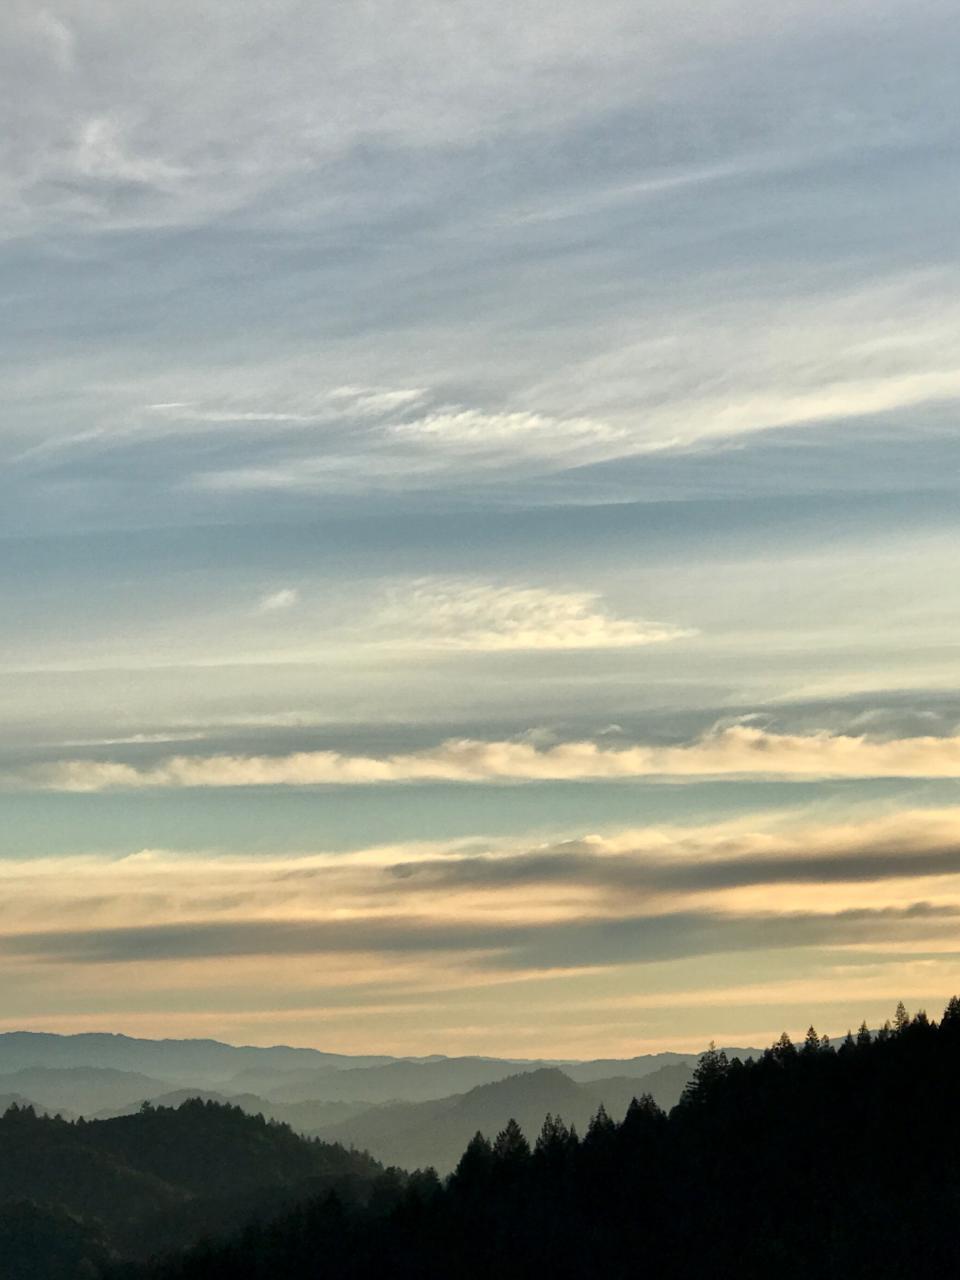 This is what the air over Healdsburg looked like earlier this morning. (Photo courtesy of Holly Wilson)